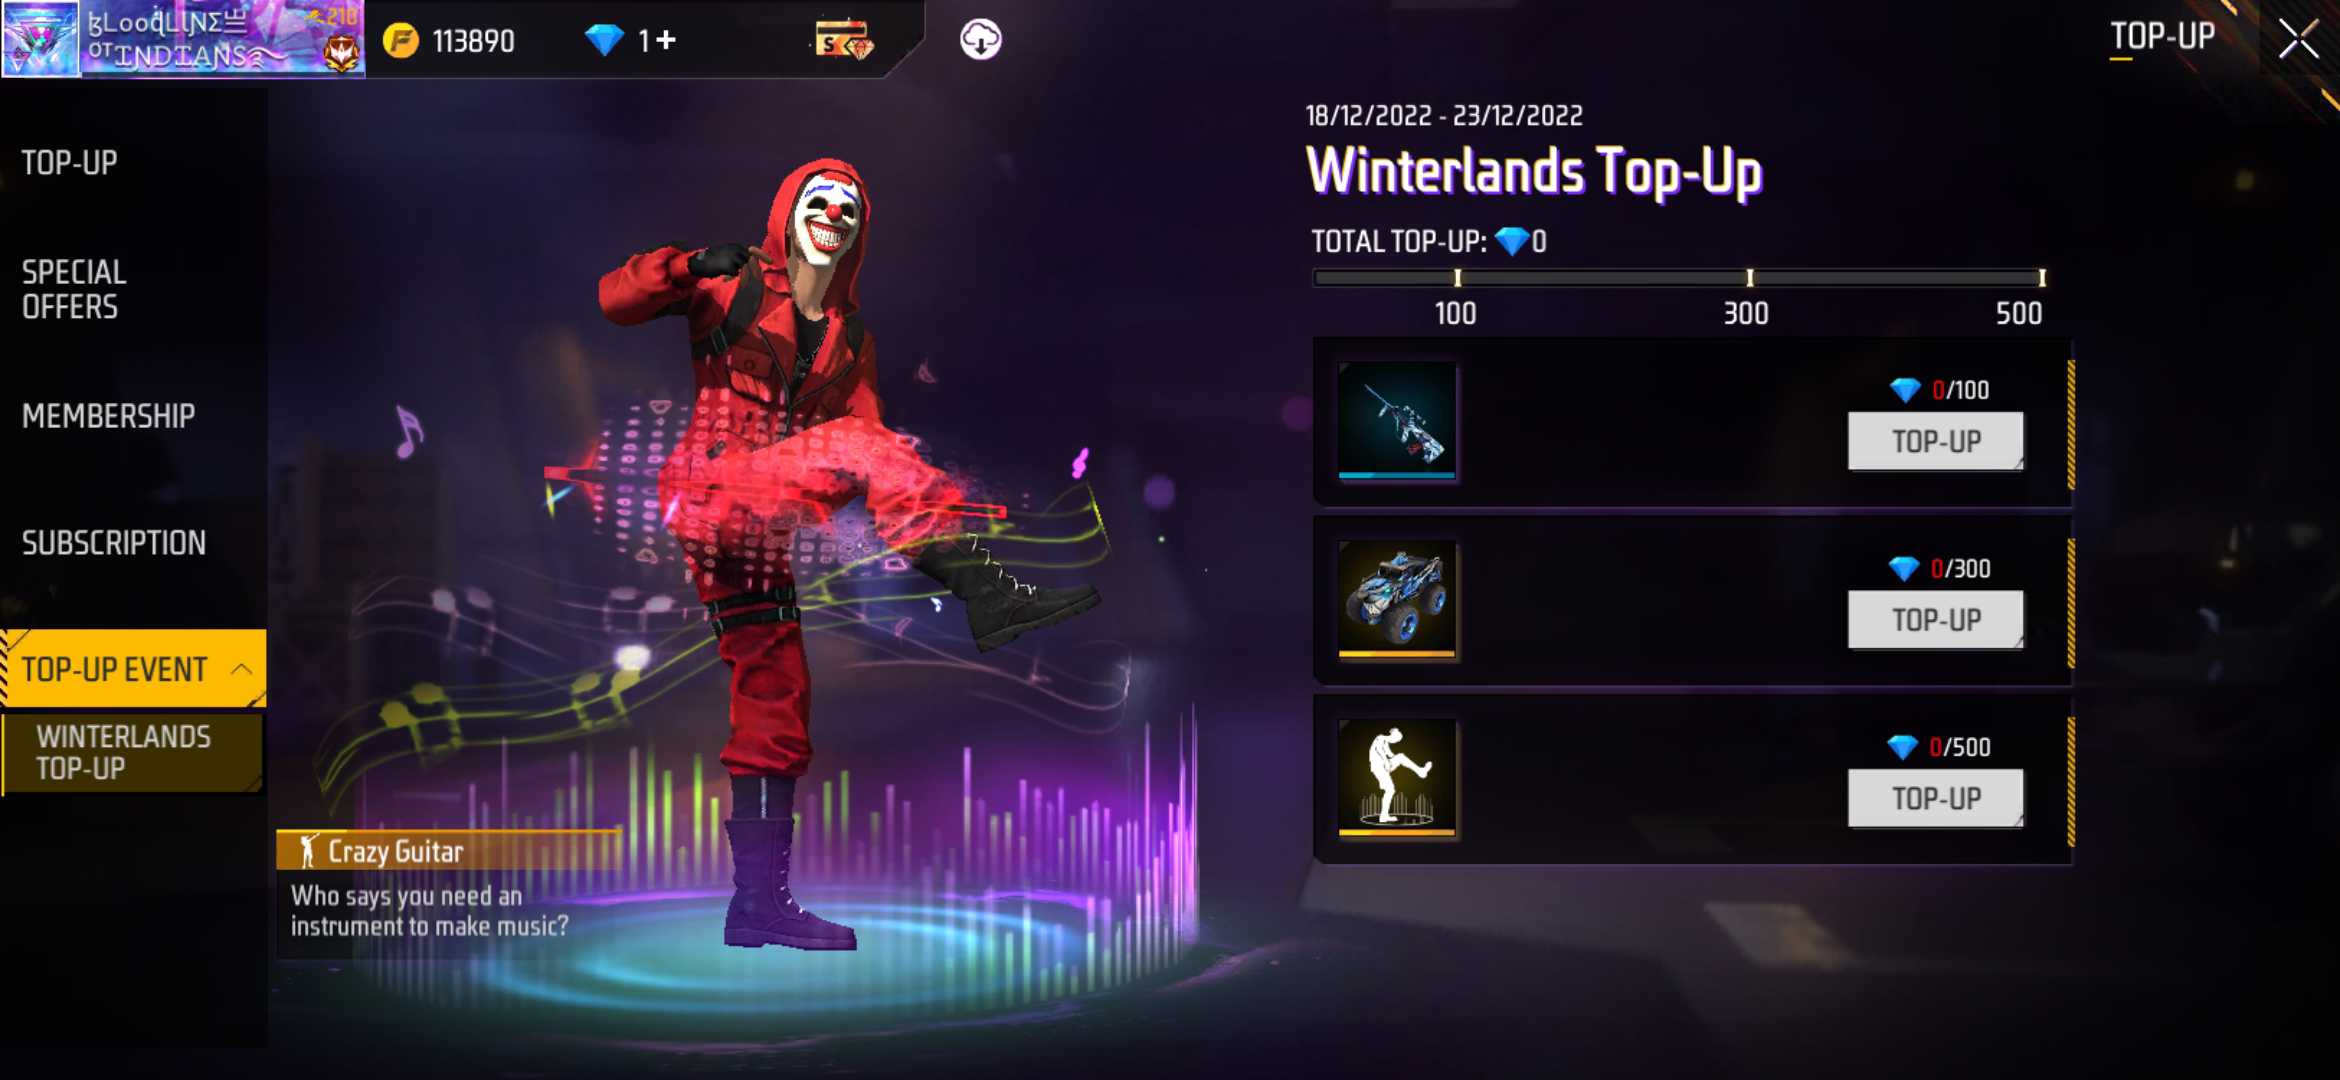 The New Top-Up Event In Free Fire – The Winterland Top-up